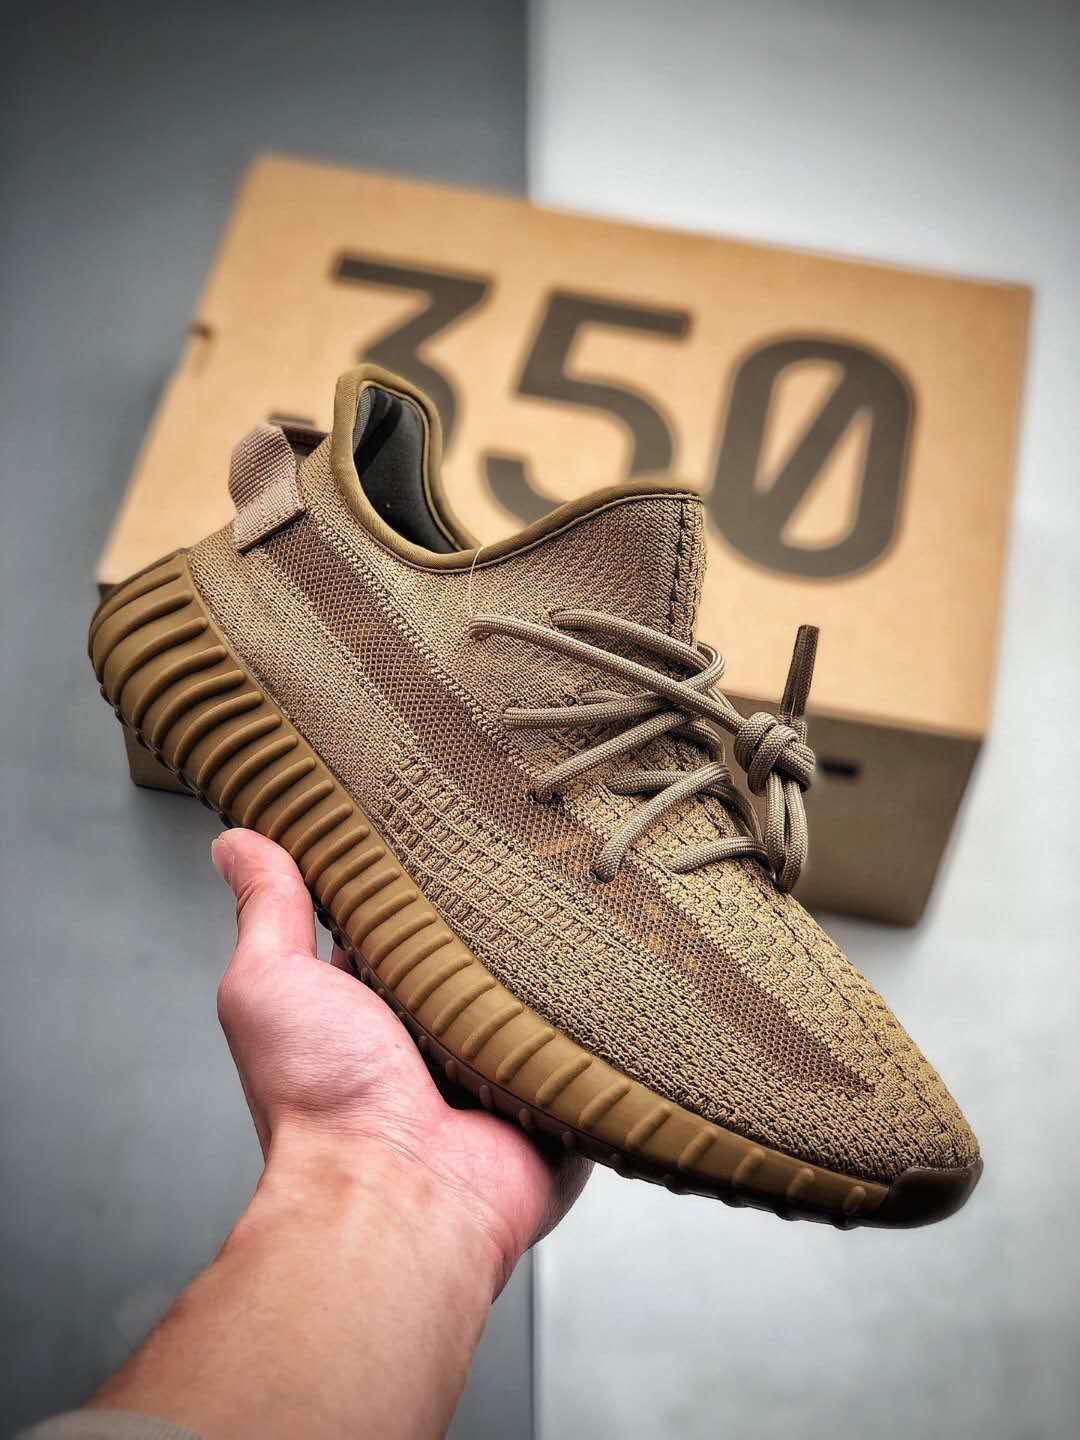 Adidas Yeezy Boost 350 V2 Earth FX9033 - Premium Footwear for Style and Comfort